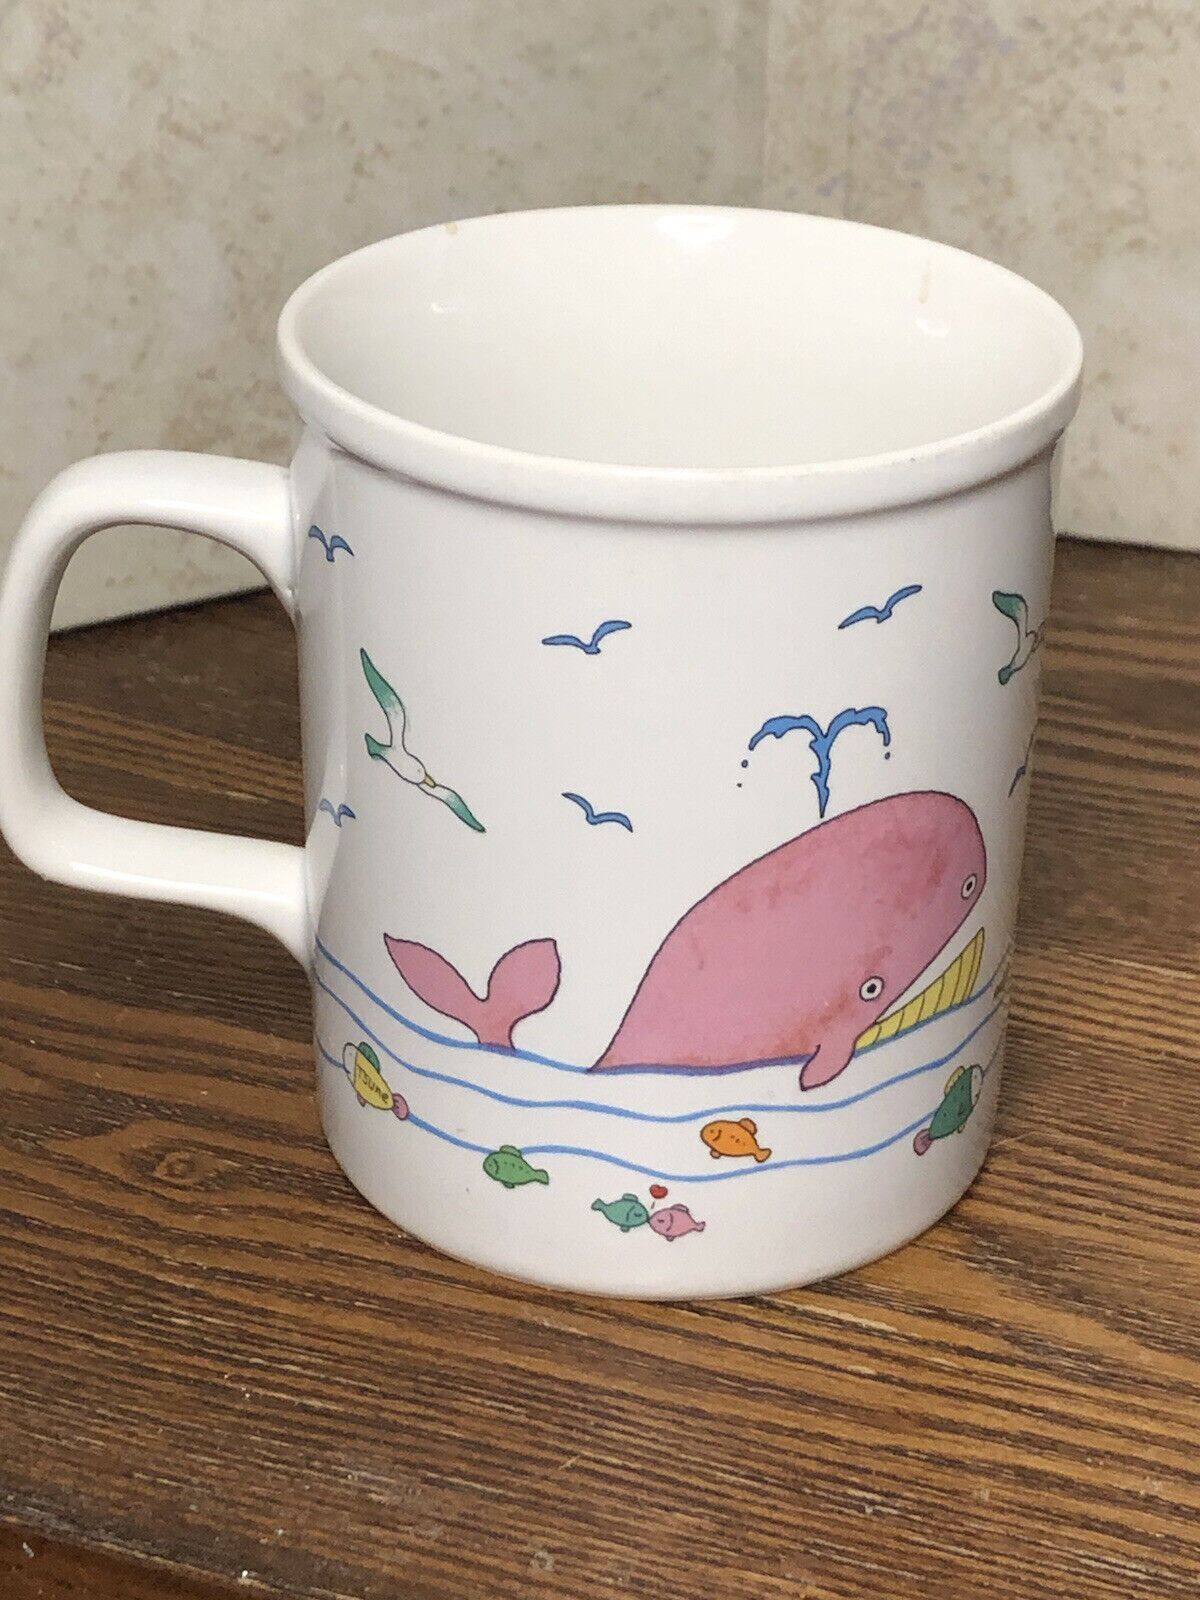 Fun Colorful Oh Whale Coffee Mug Primary Colors Bright Fish Seagulls Boat 3.75”H